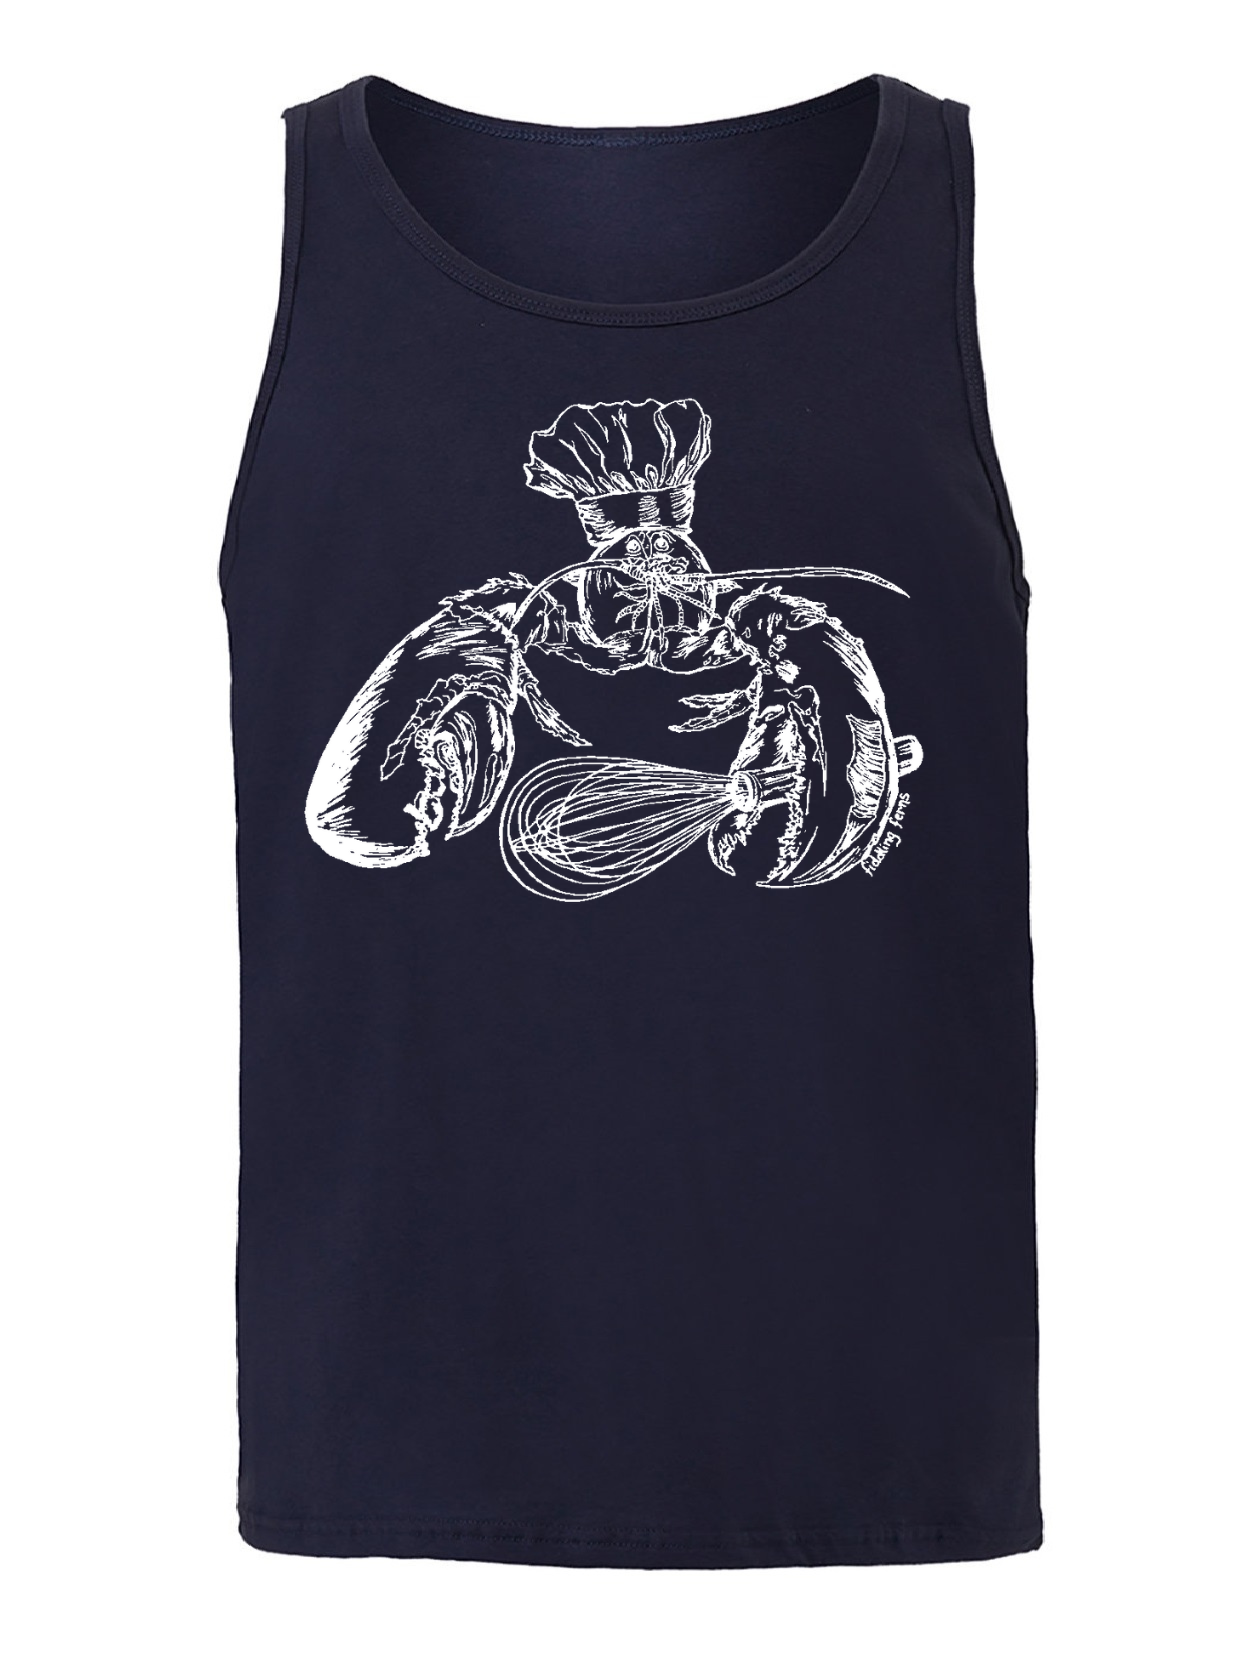 Chef Lobster Unisex Tank Top